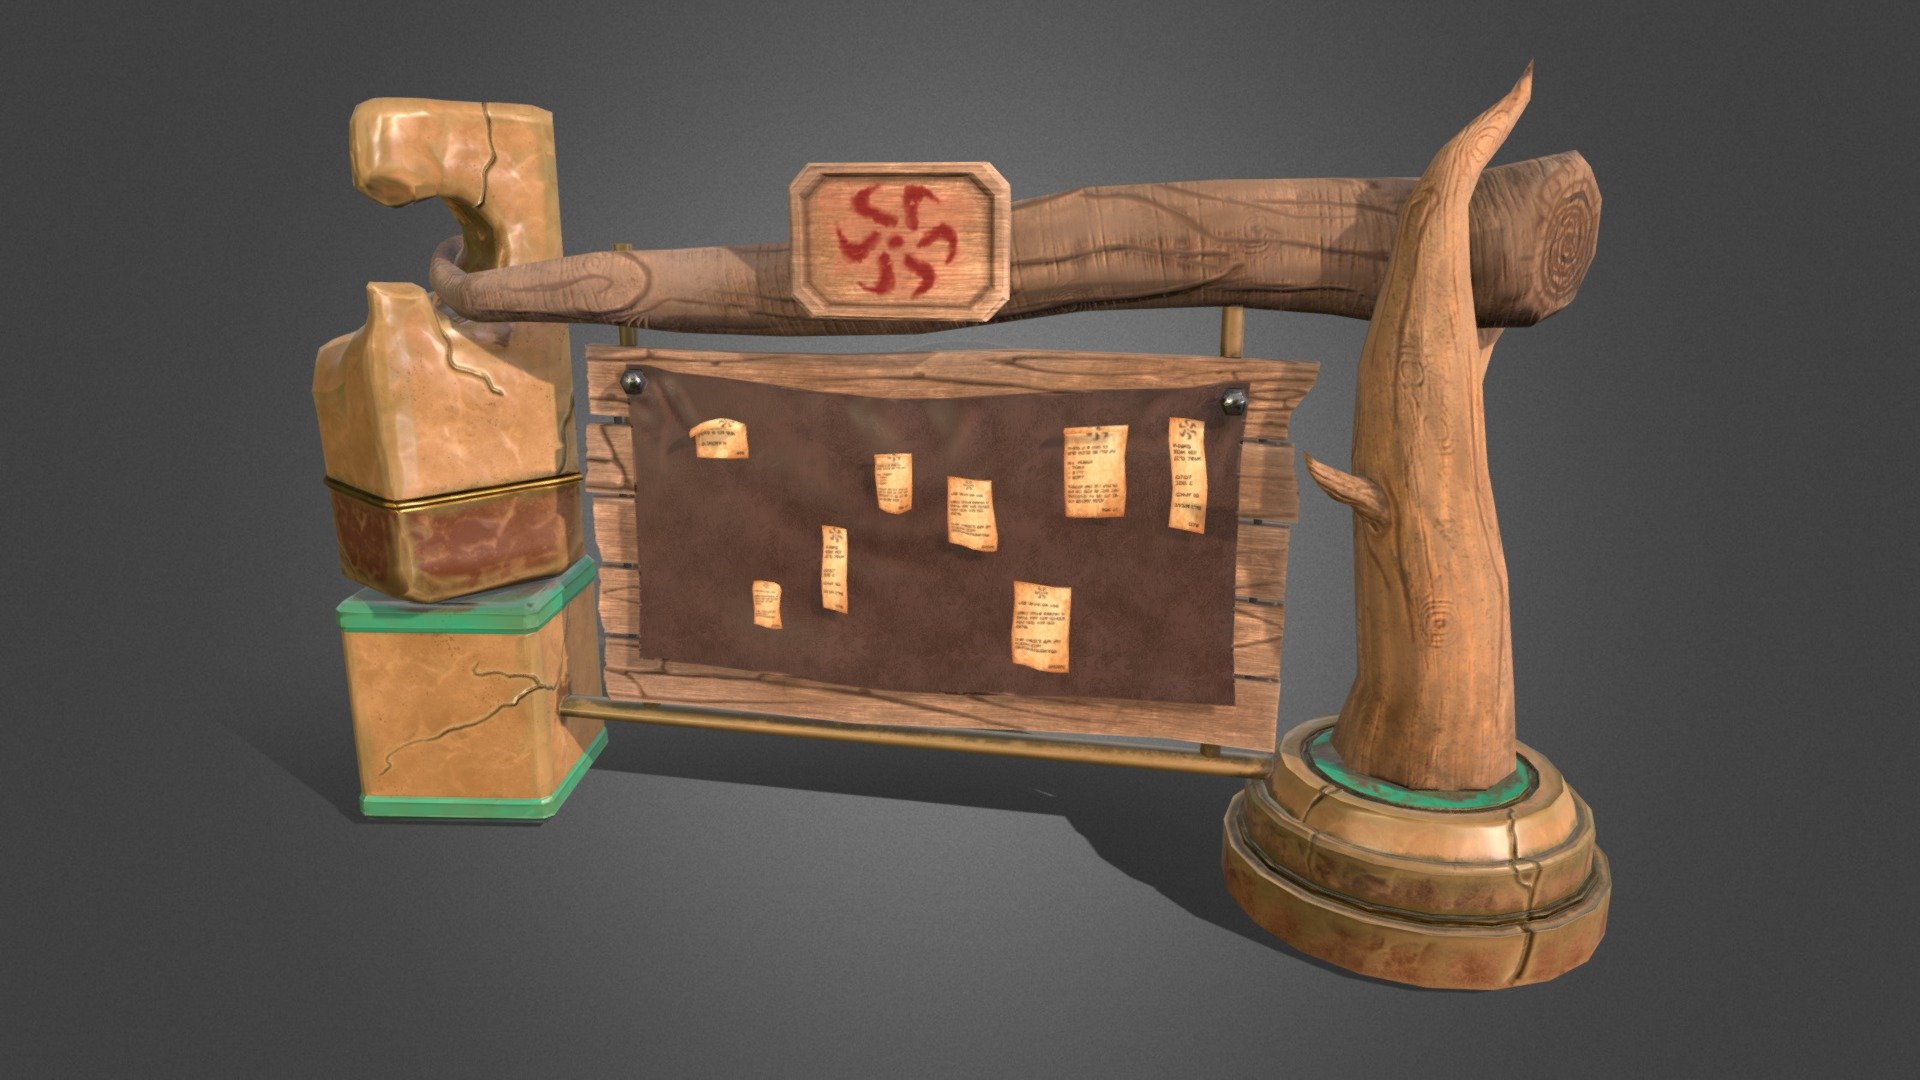 A model I made for a commission, hope you like it!
It's made of ruins and scrap materials, found at the ancient village ruins - Quest Board | PrimeshotStudios - 3D model by Zemasu 3d model